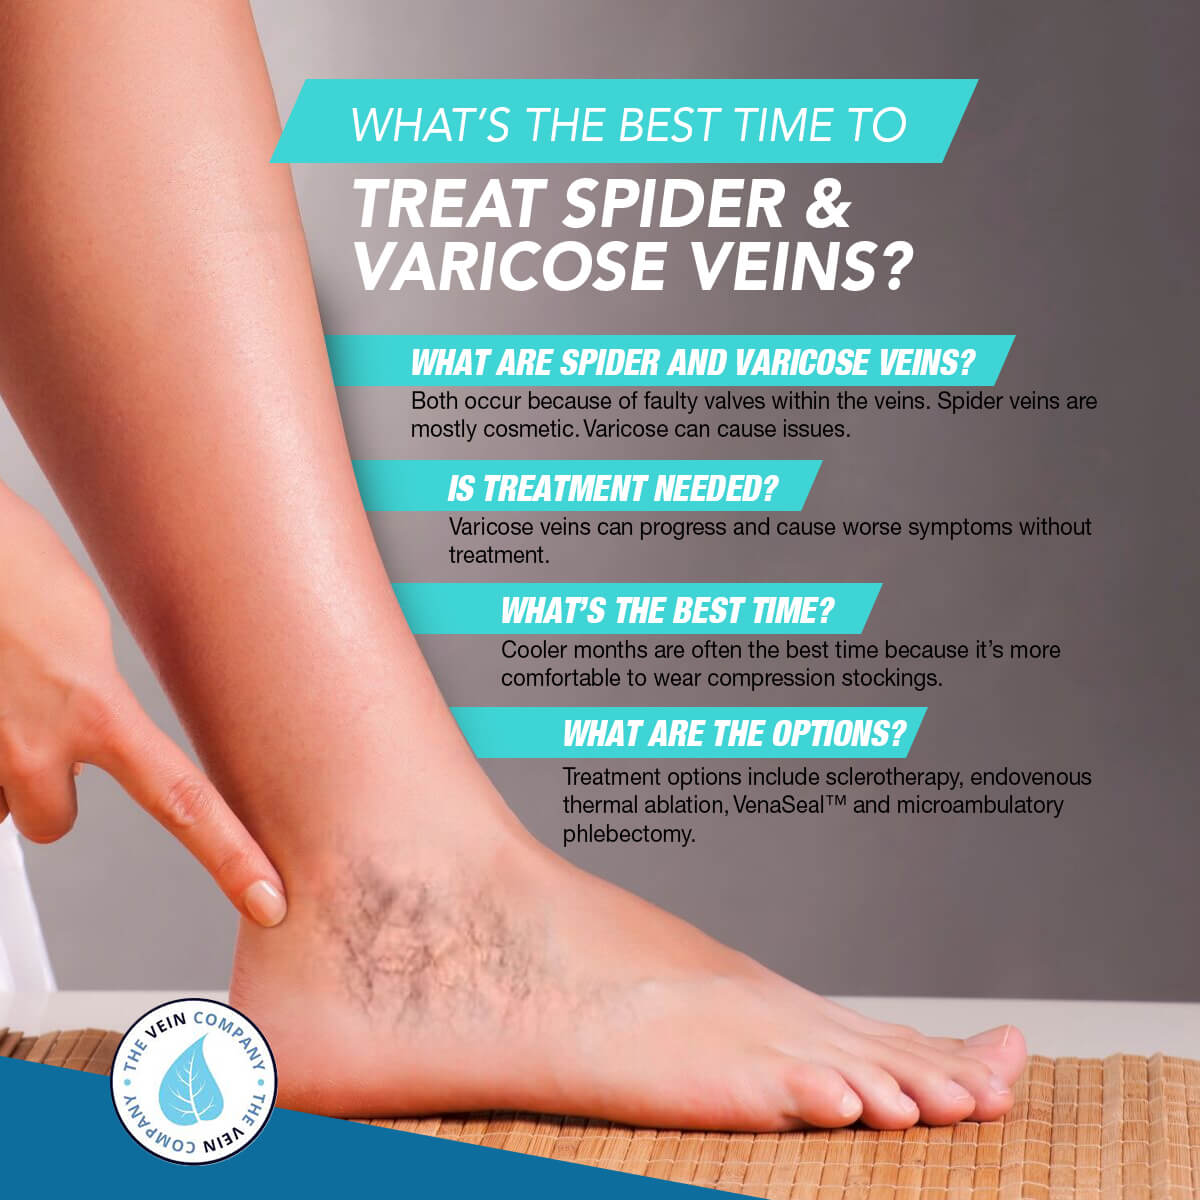 What's The Best Time To Treat Spider & Varicose Veins